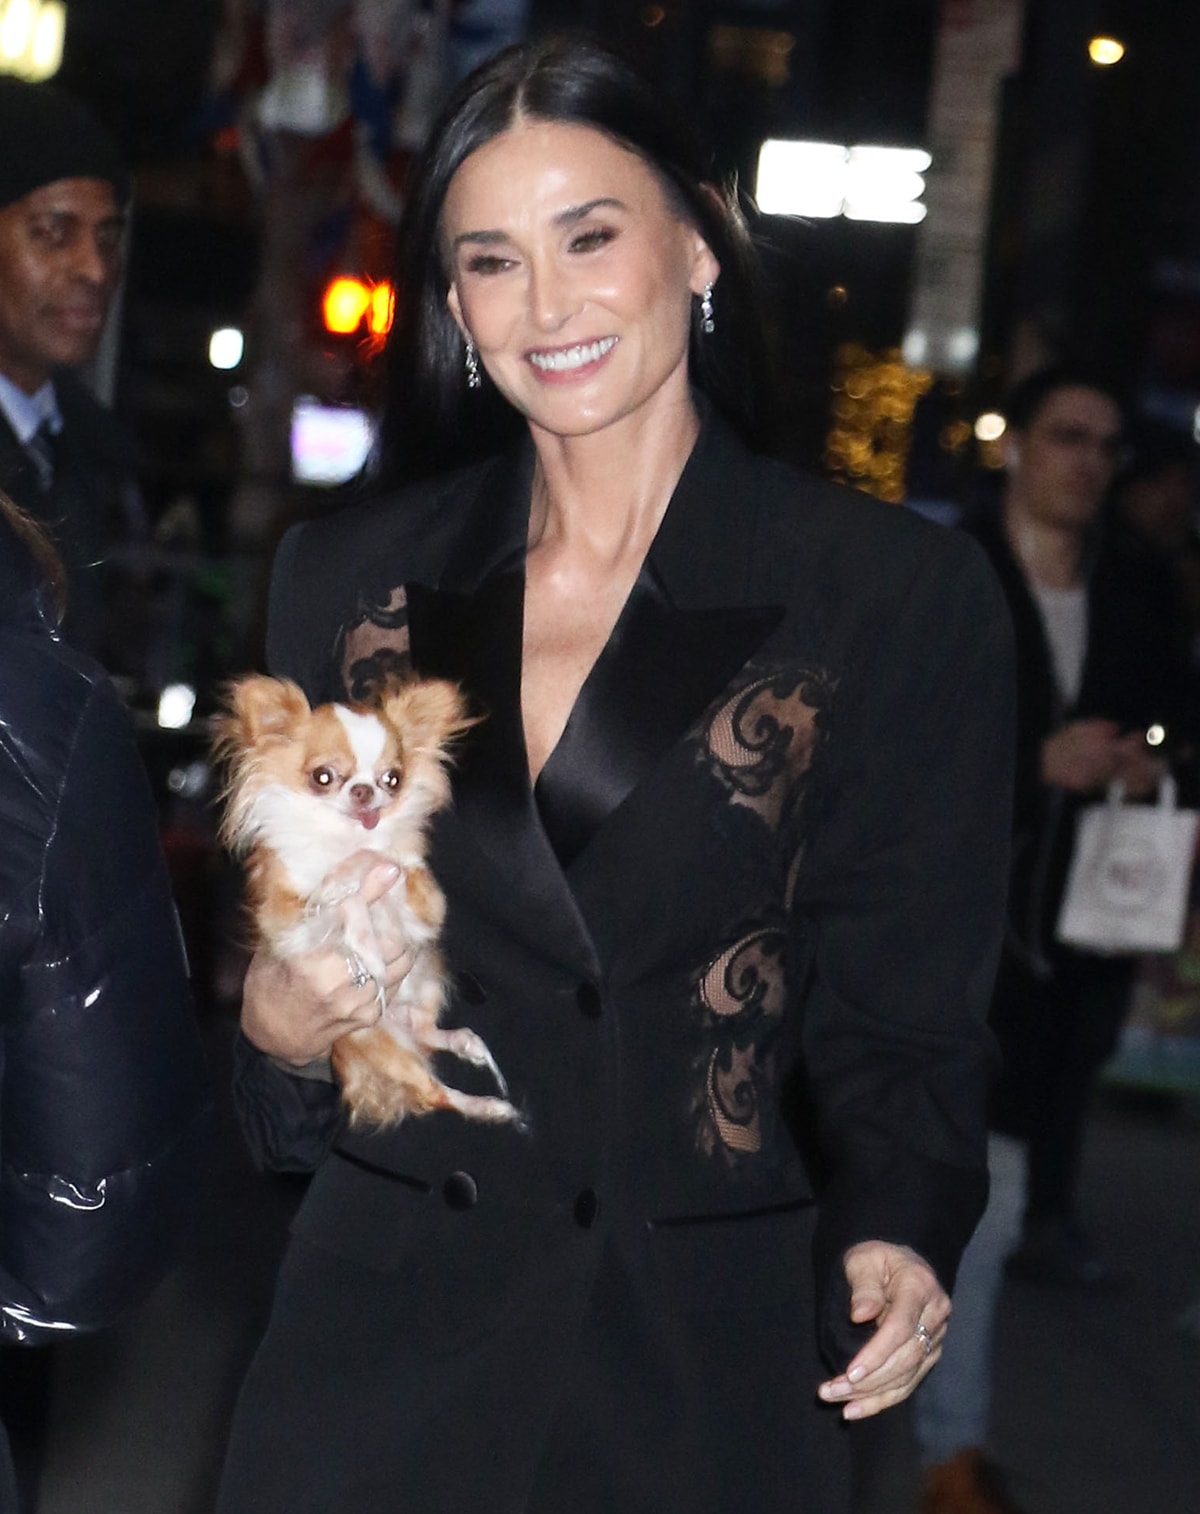 Demi Moore, with her furry companion Pilaf, looks sleek with straightened hair and radiant makeup